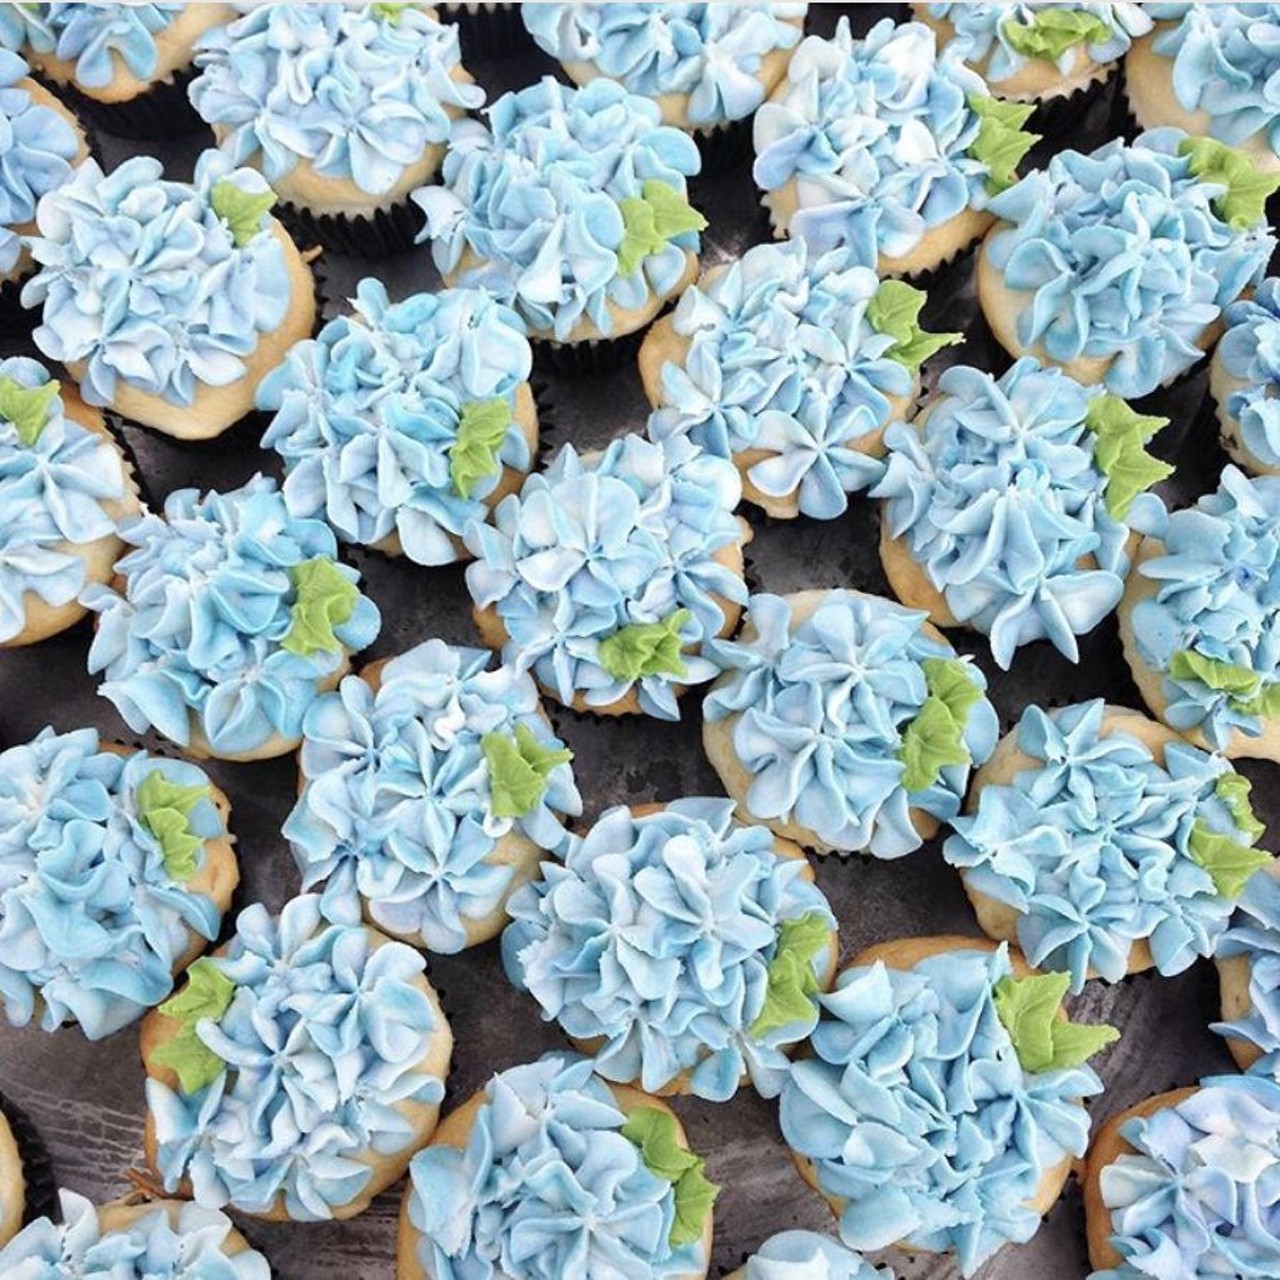  Kelsey Elizabeth
Kelsey Elizabeth's cakes look the kind of perfect that can only exist on Instagram. But with shops in Avon Lake and Rocky River, you can experience this baked goods utopia for yourself.
Photo via  kelseyelizabethcakes/Instagram